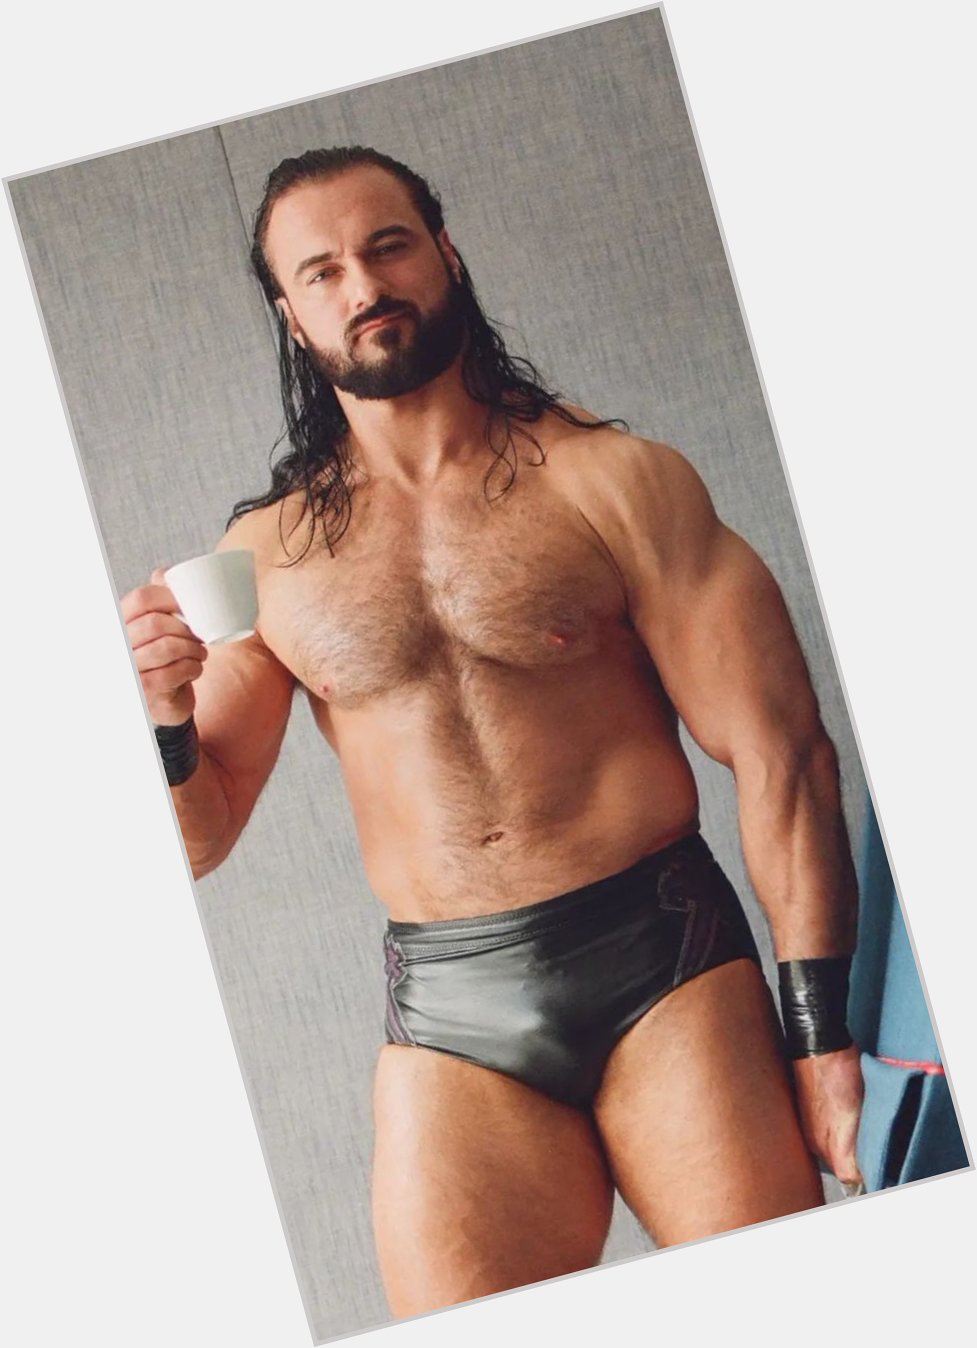 Happy birthday to all the Drew McIntyre. I hope you have wonderful day! 